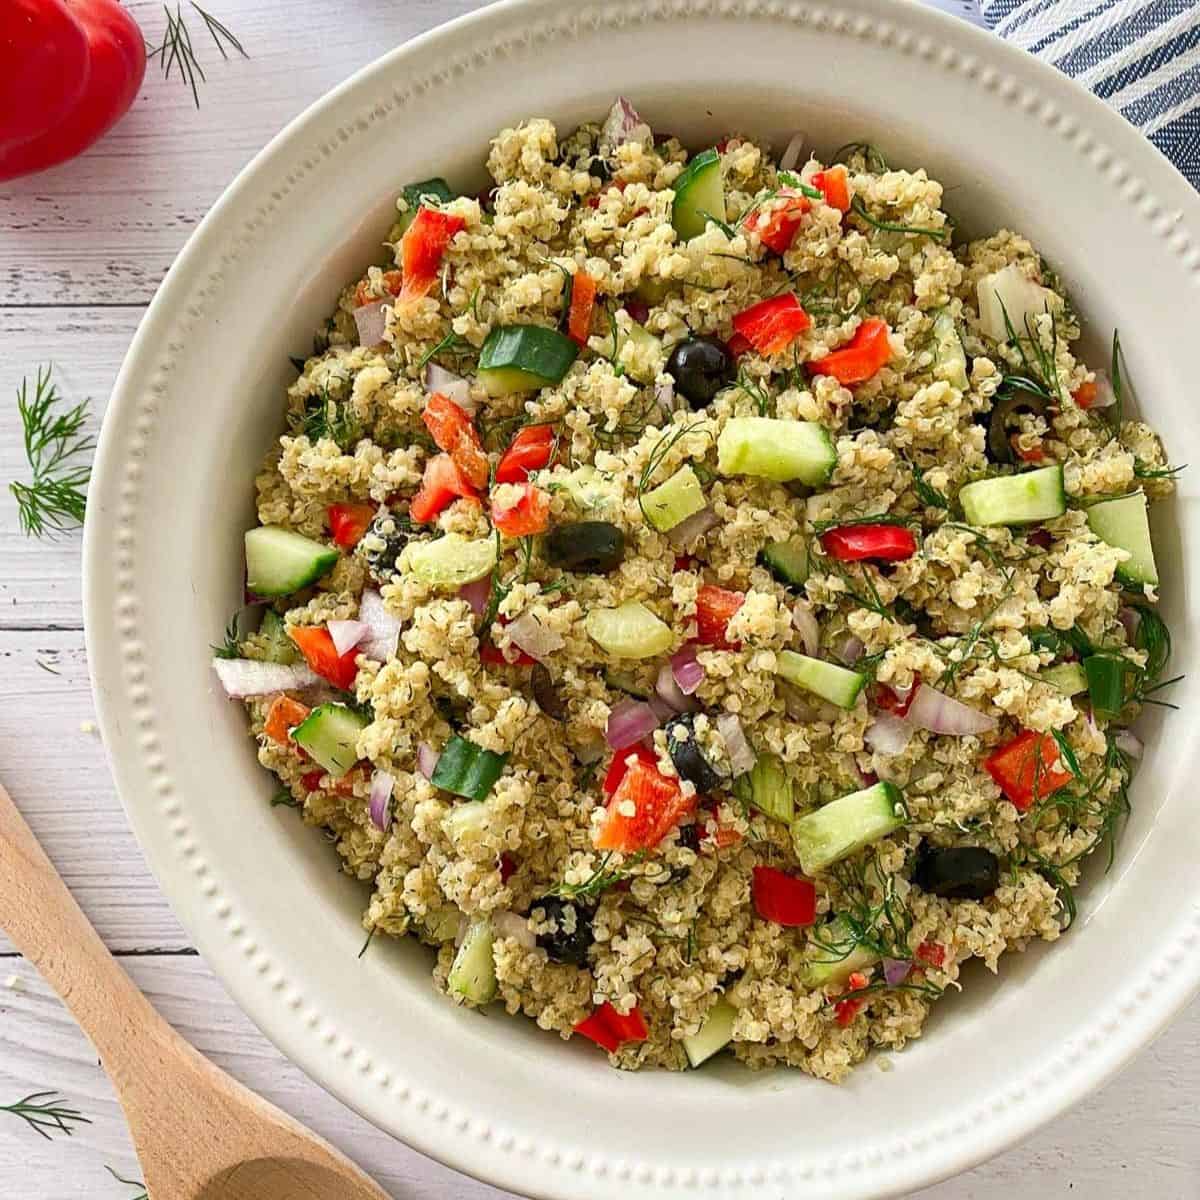 Large bowl of quinoa salad with red pepper, olives, and cucumber.